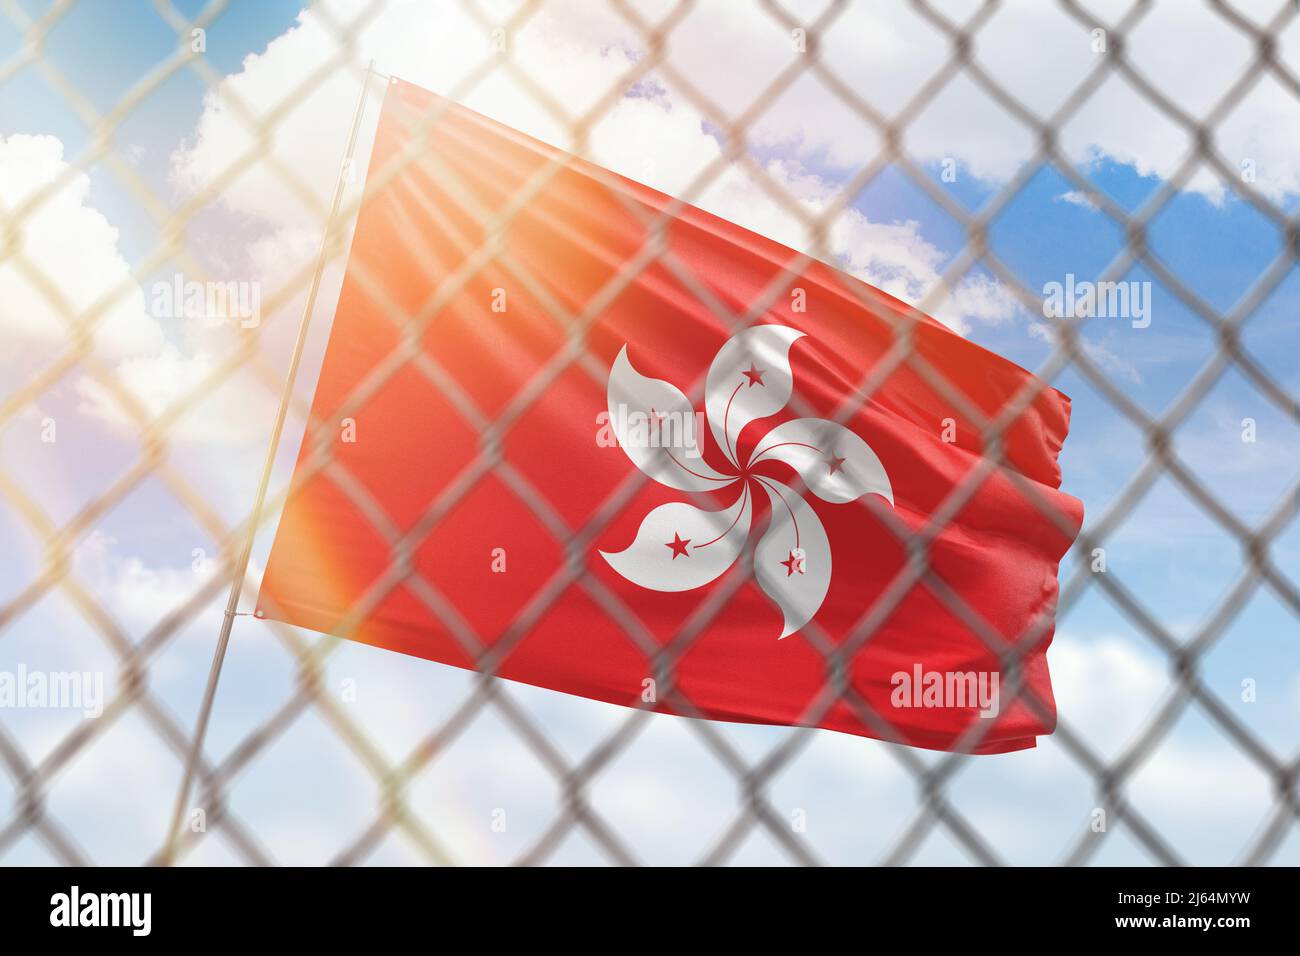 A steel mesh against the background of a blue sky and a flagpole with the flag of hong kong Stock Photo